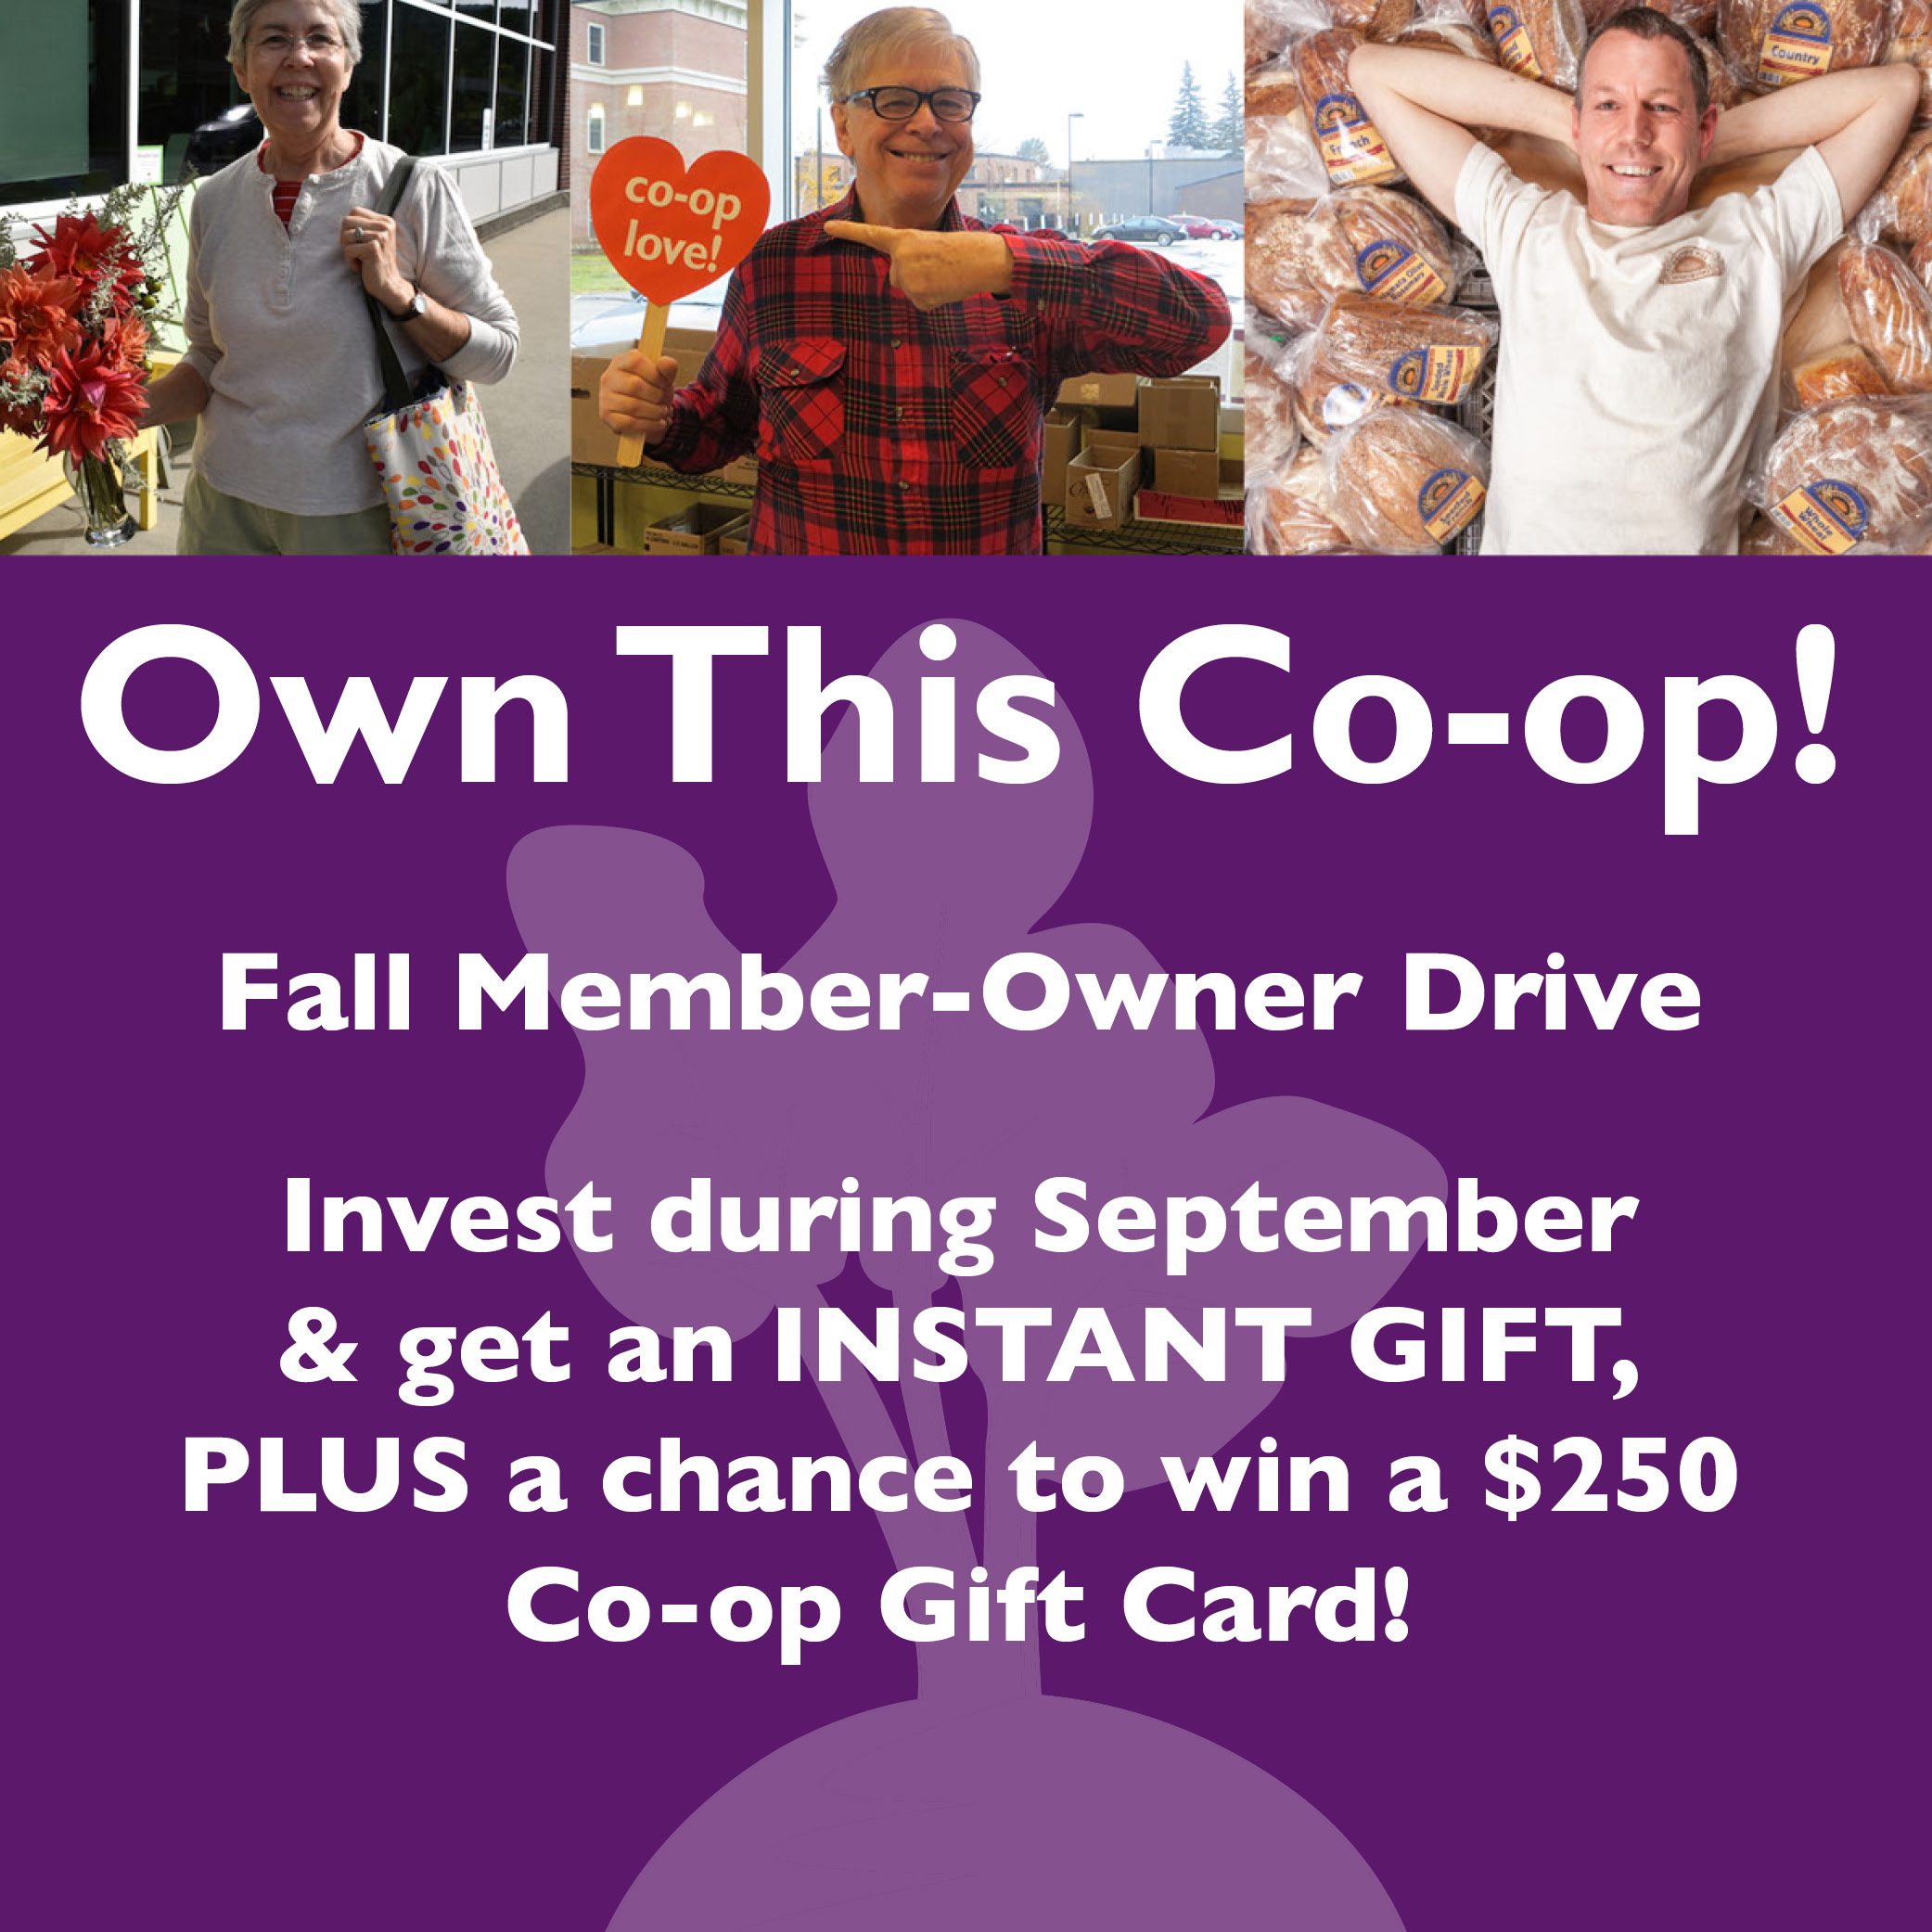 Textile Recycling Drive at the Co-op - Monadnock Food Co-op